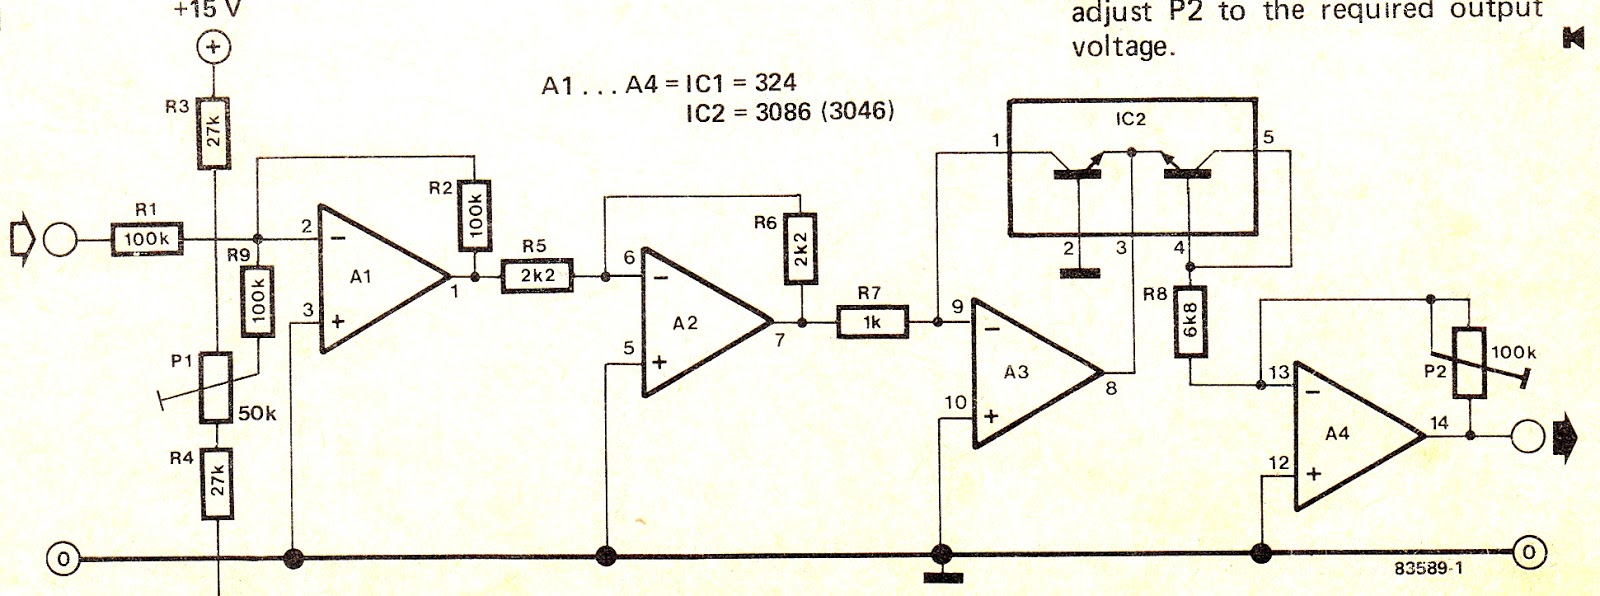 Simple Logarithmic Amplifier Circuit - Making Easy Circuits